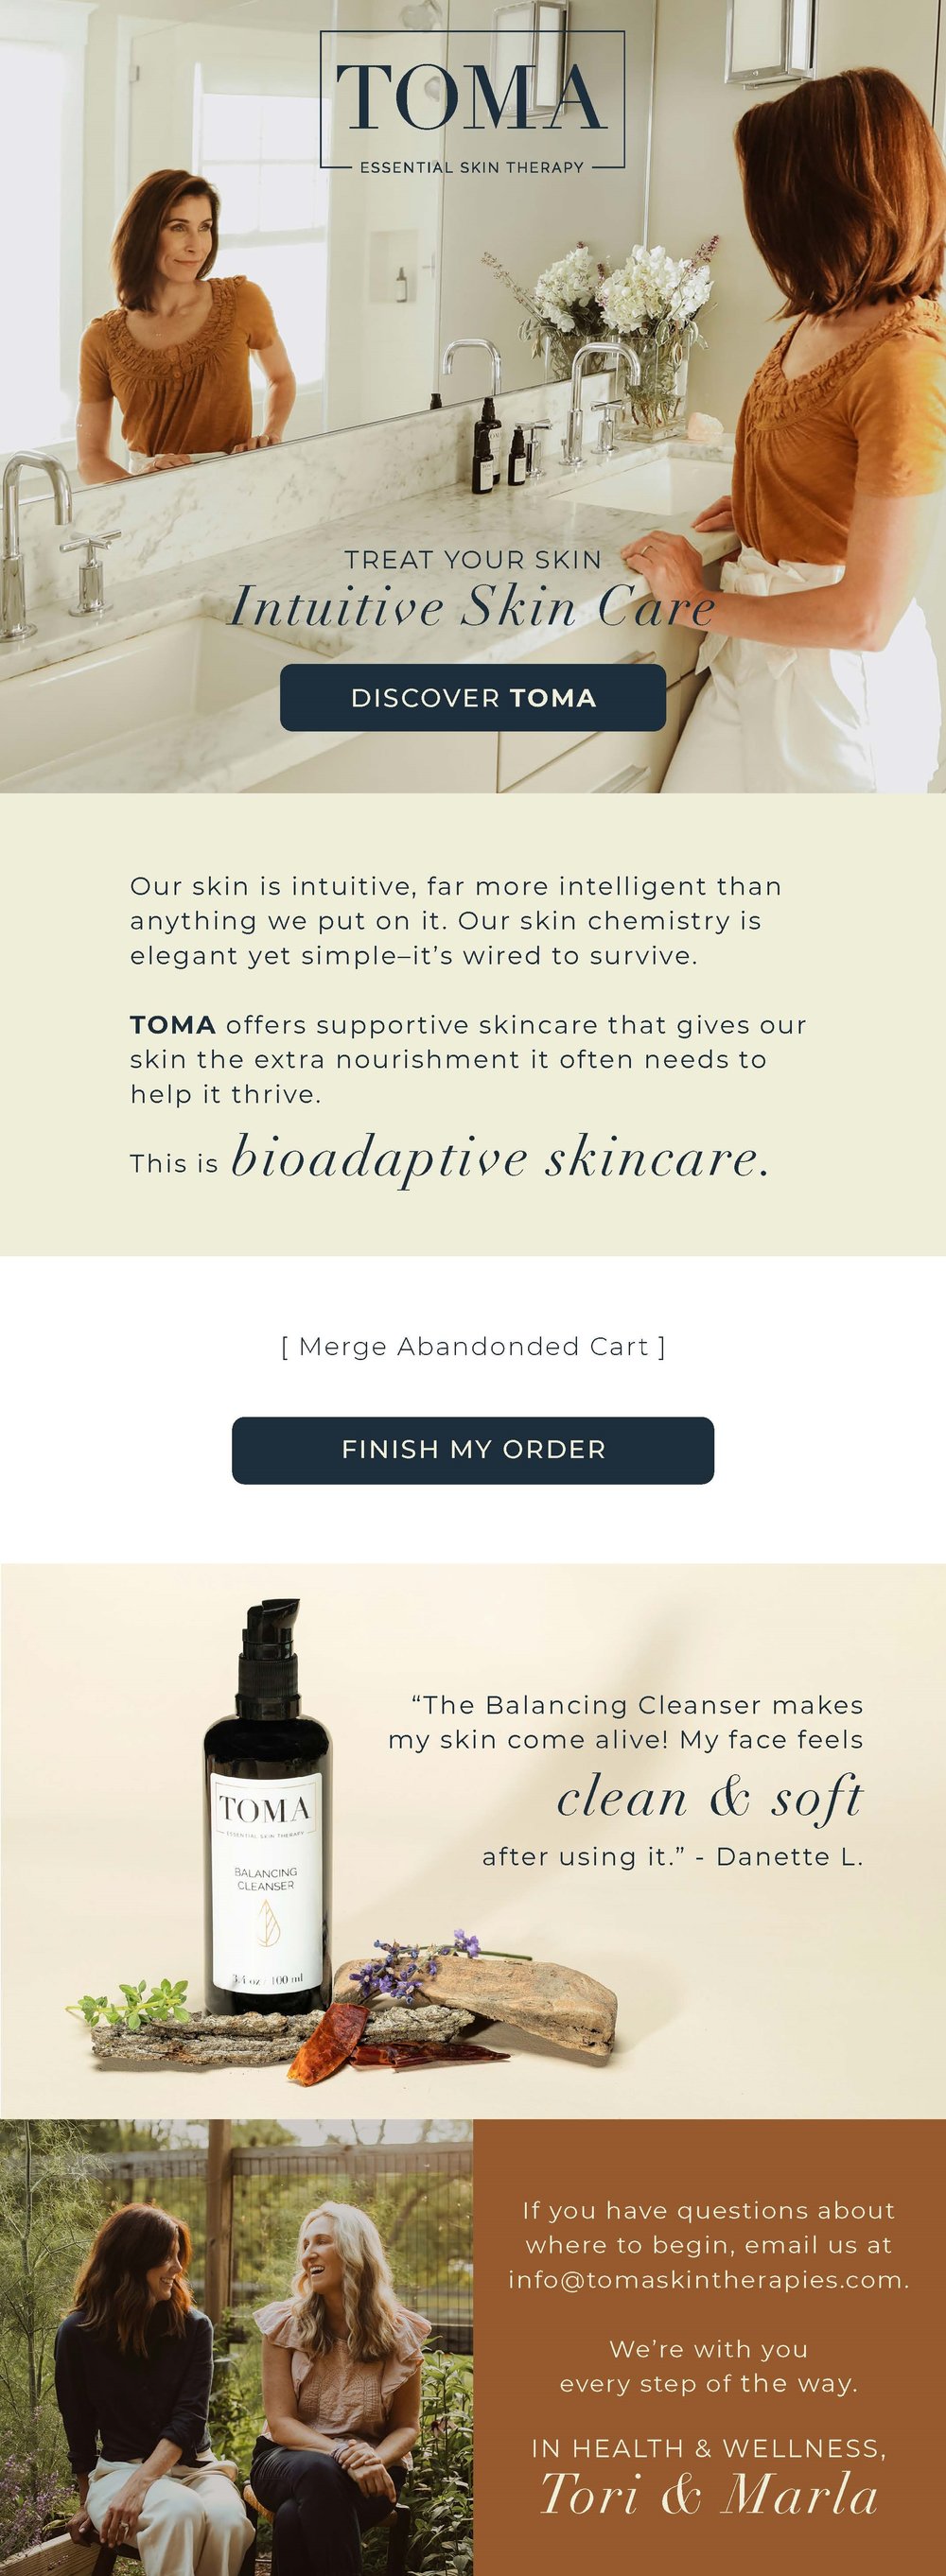 Toma Skin Therapies Email Designs September 2021 - Abandonded Cart Email 2.jpg